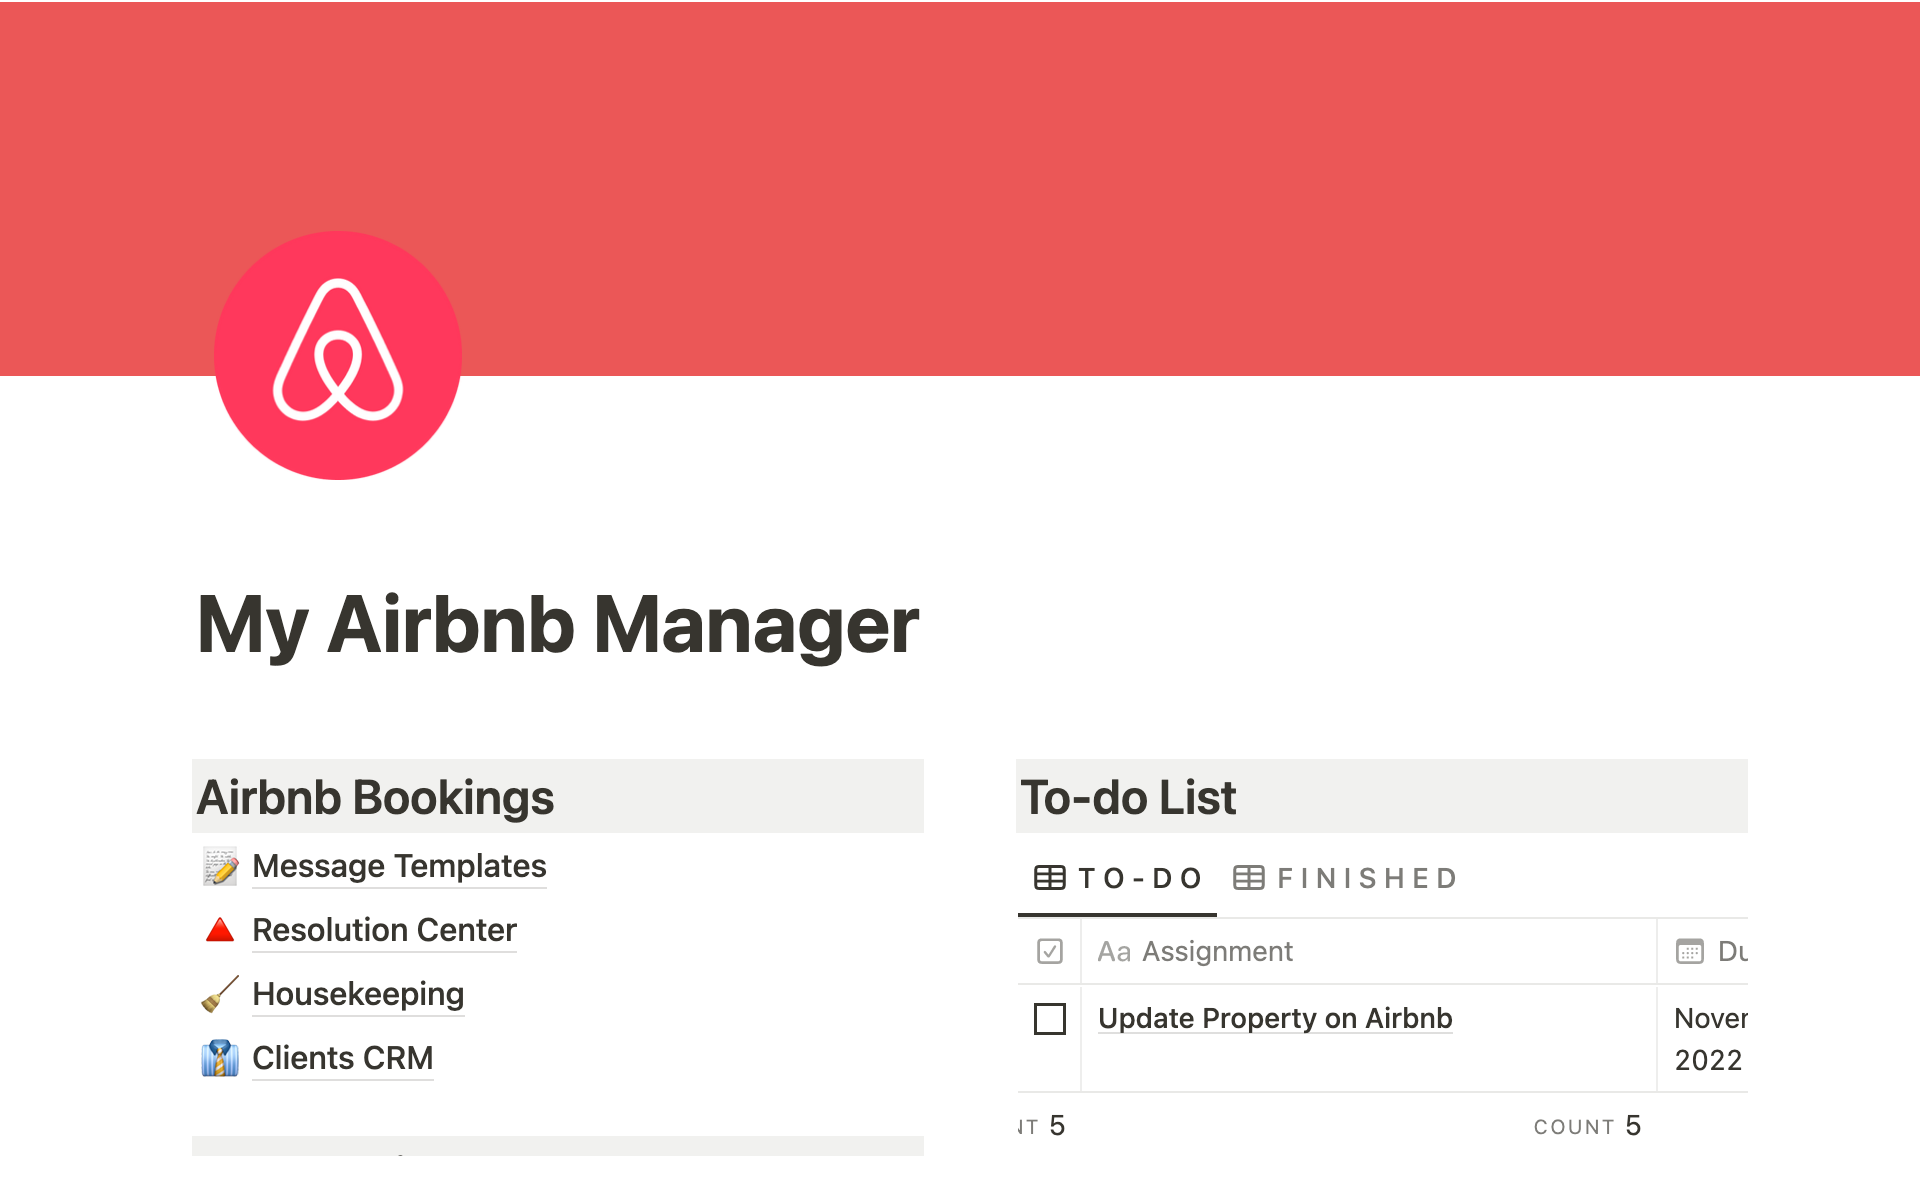 Manage your Airbnb business easily.